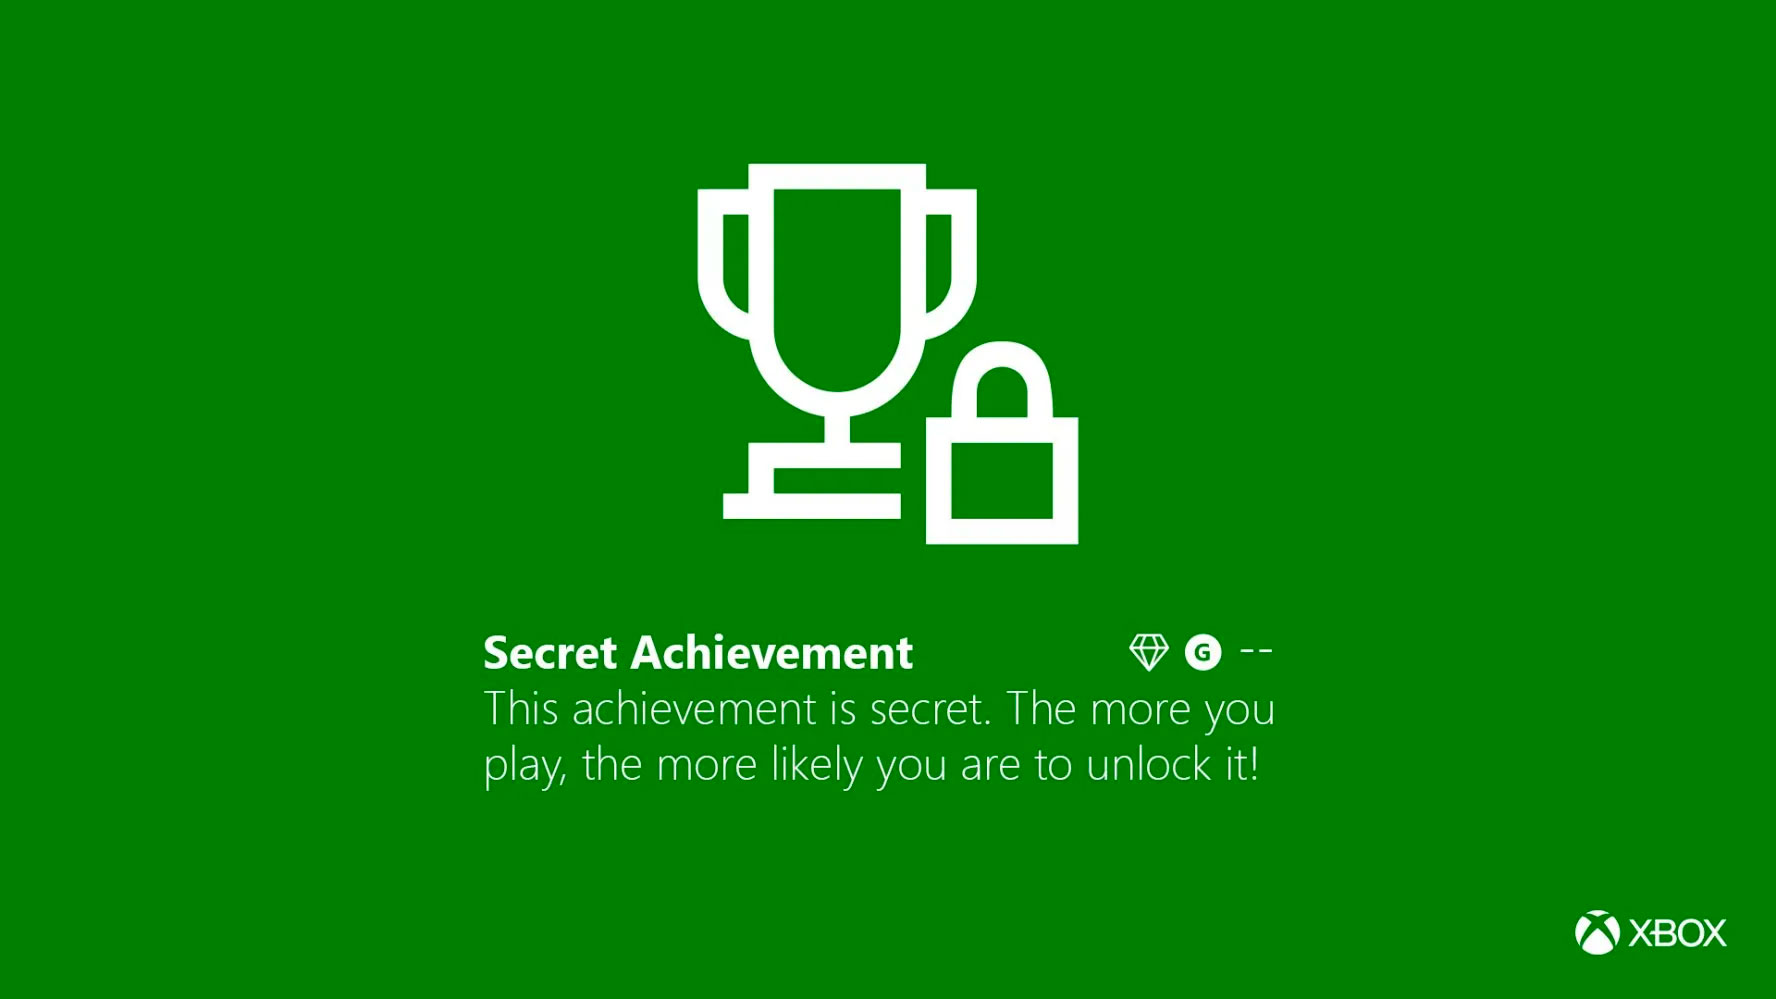 Xbox June Update: Secret Achievements and Discover Updates on the Timeline!  |  Xbox One